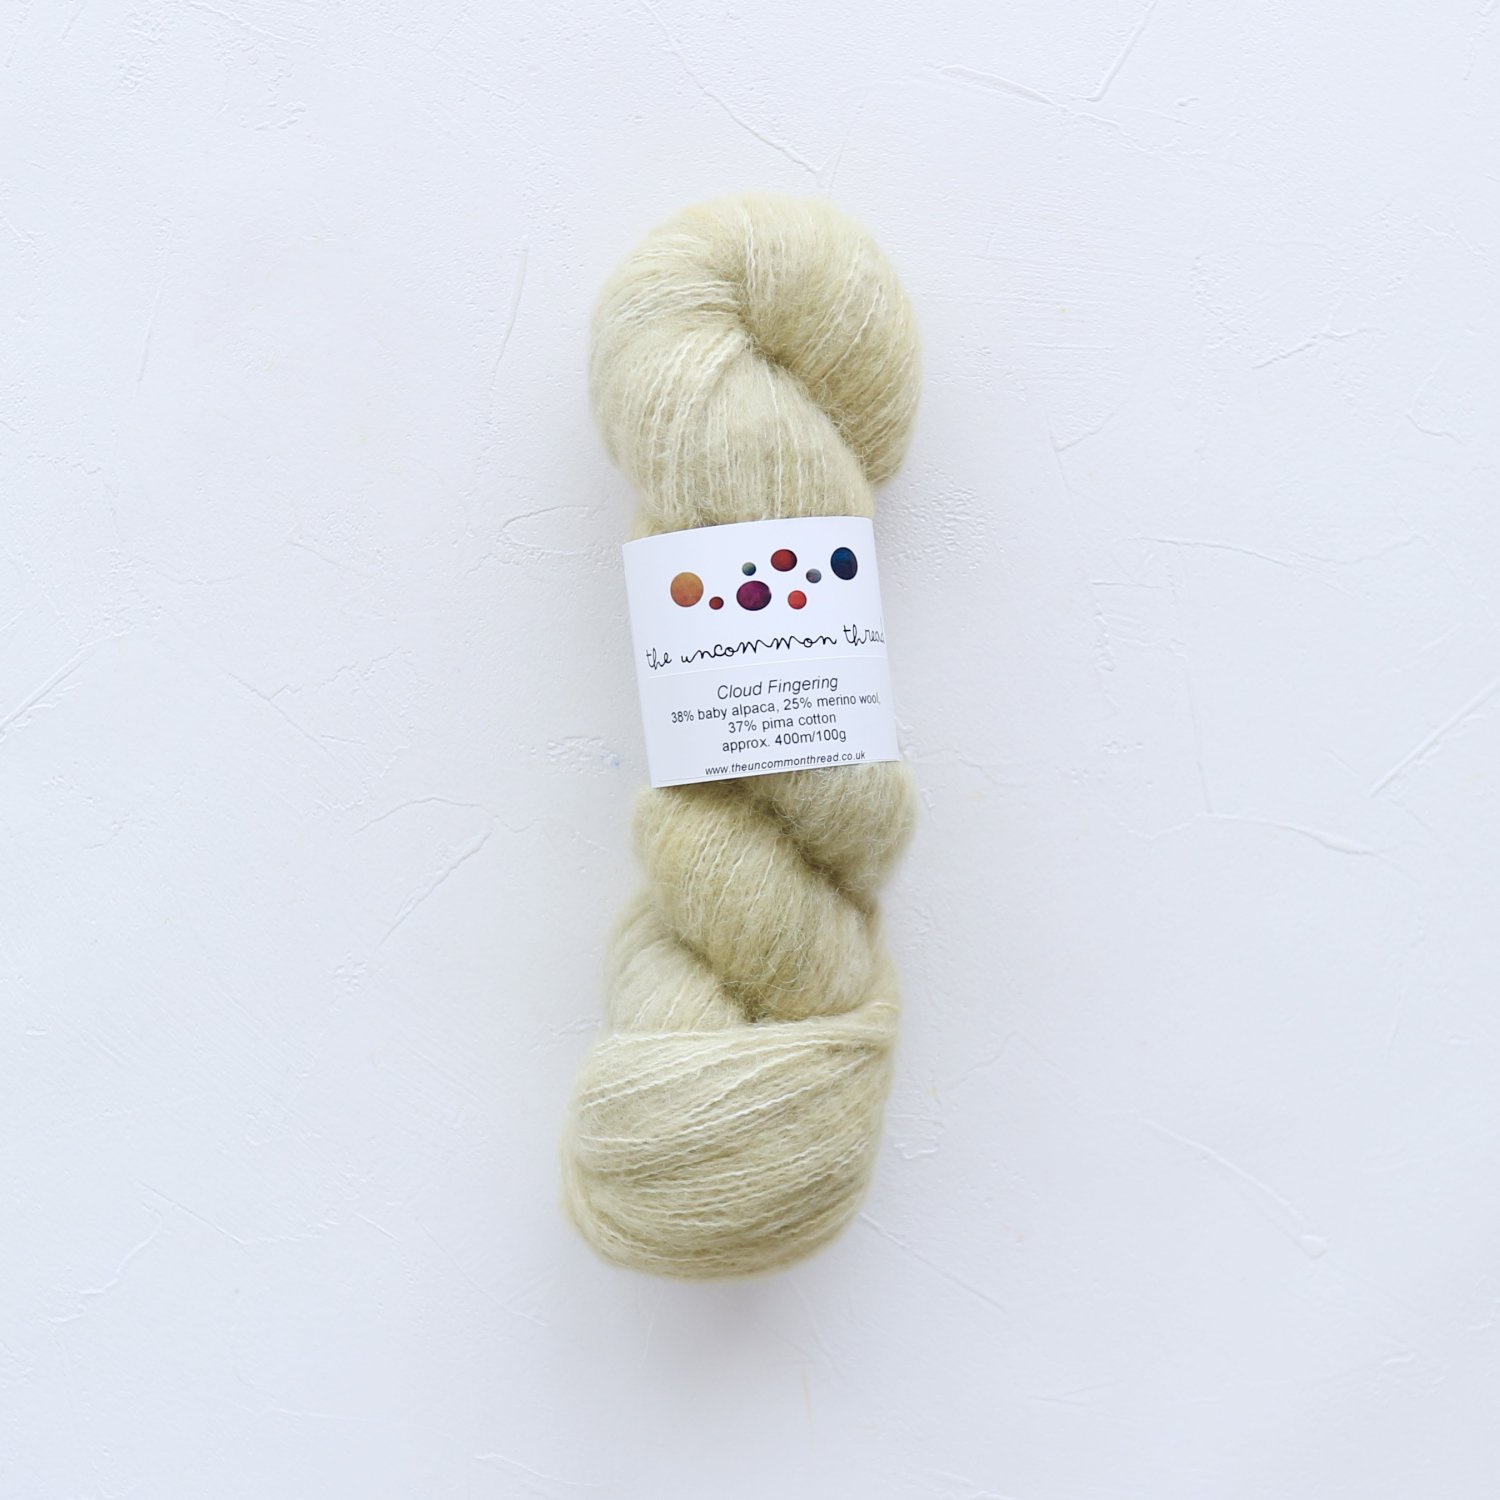 【The Uncommon Thread】<br>Cloud Fingering<br>London Stock